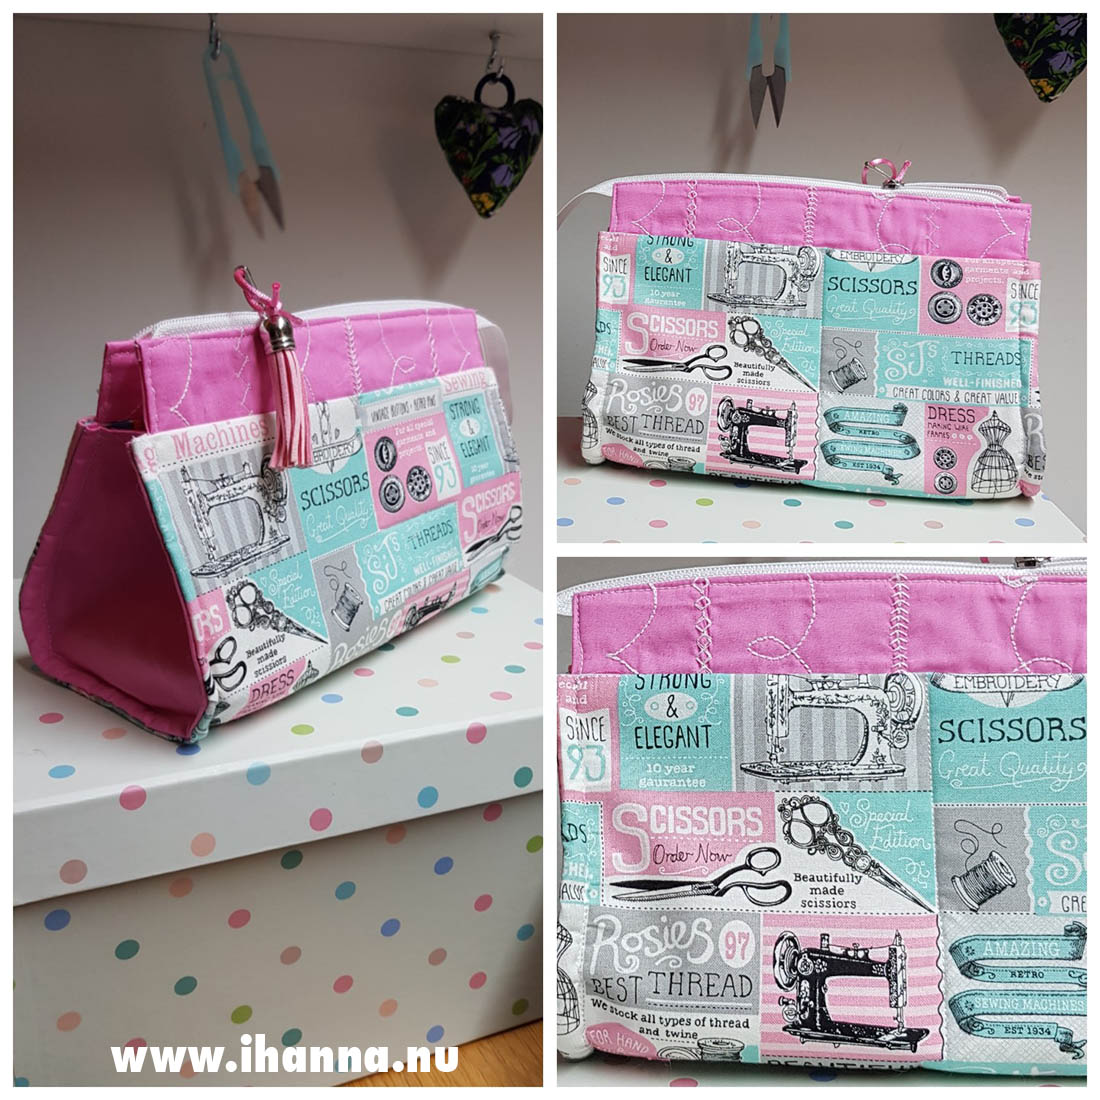 Moms sewing fabric pouch in pink and turquoise - photo copyright Hanna Andersson